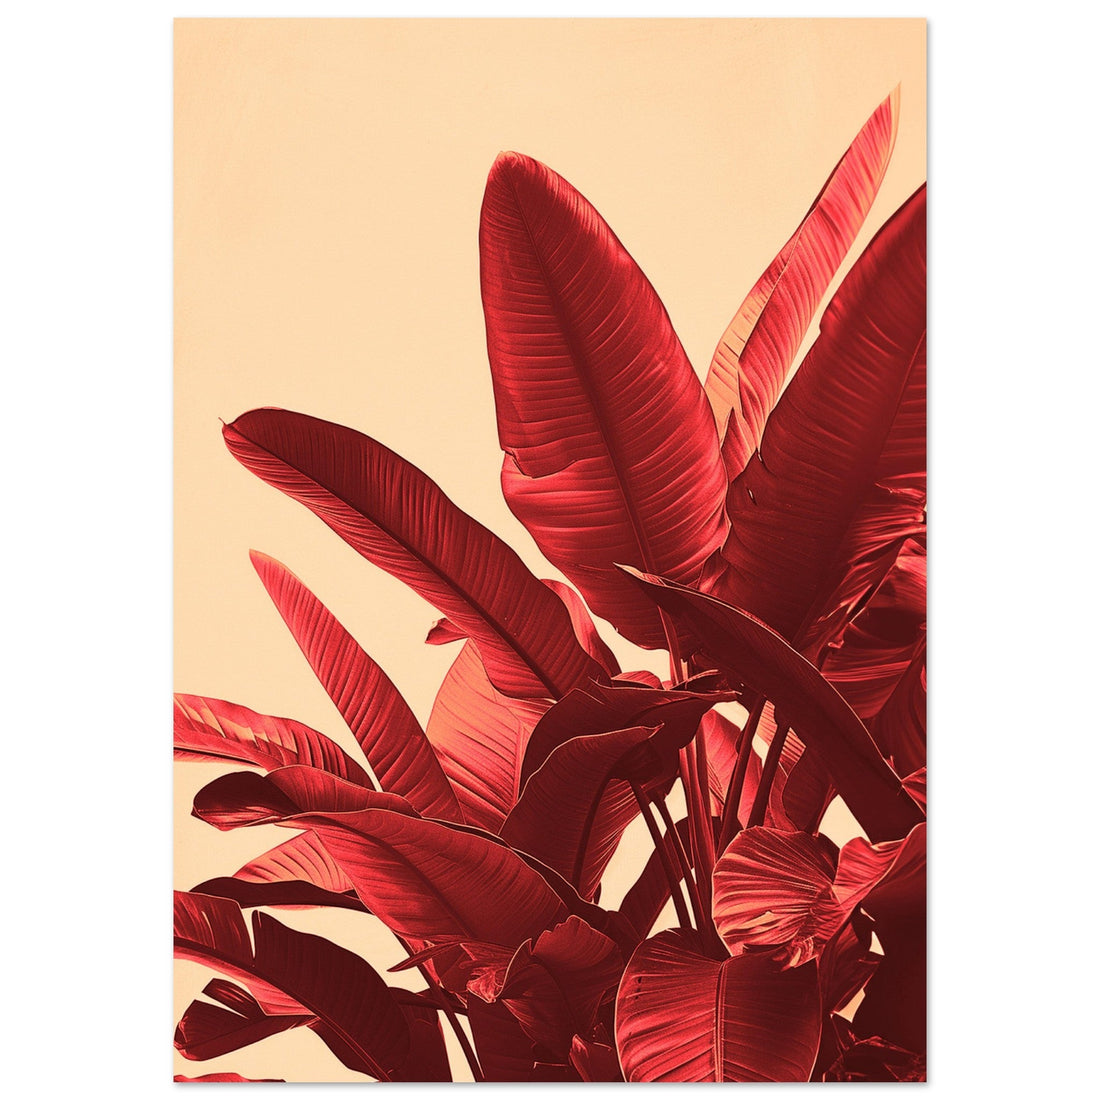 The Red Tropics, Red Tropical Leaves, Tropical Art print, Vintage Art print, #illieeart